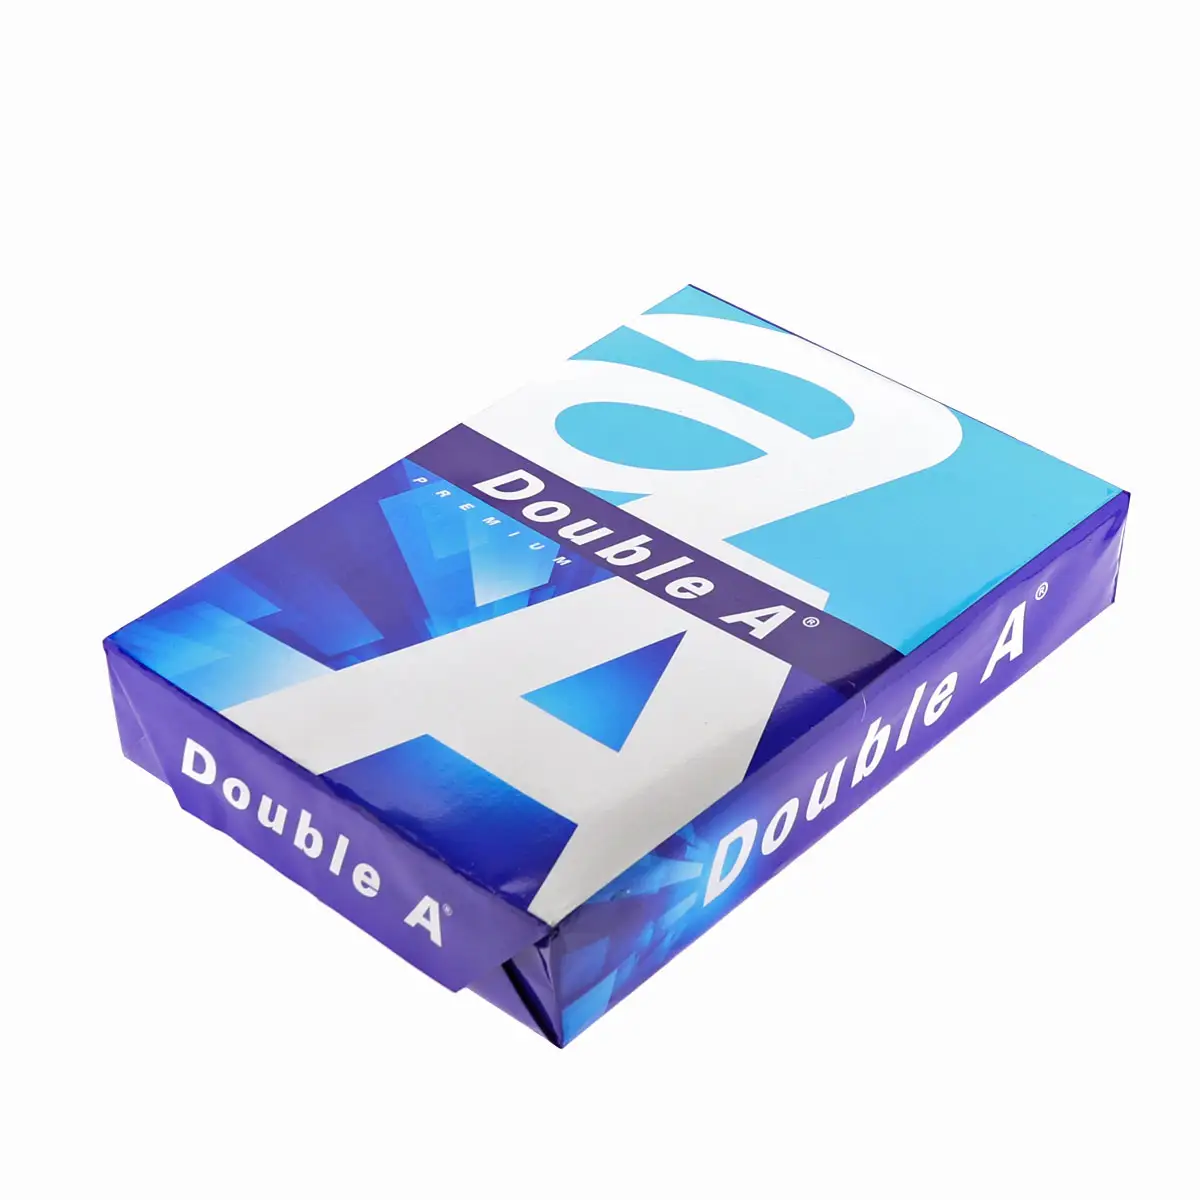 Double A A4 Copy Papers 80 Grams Wholesale Prices